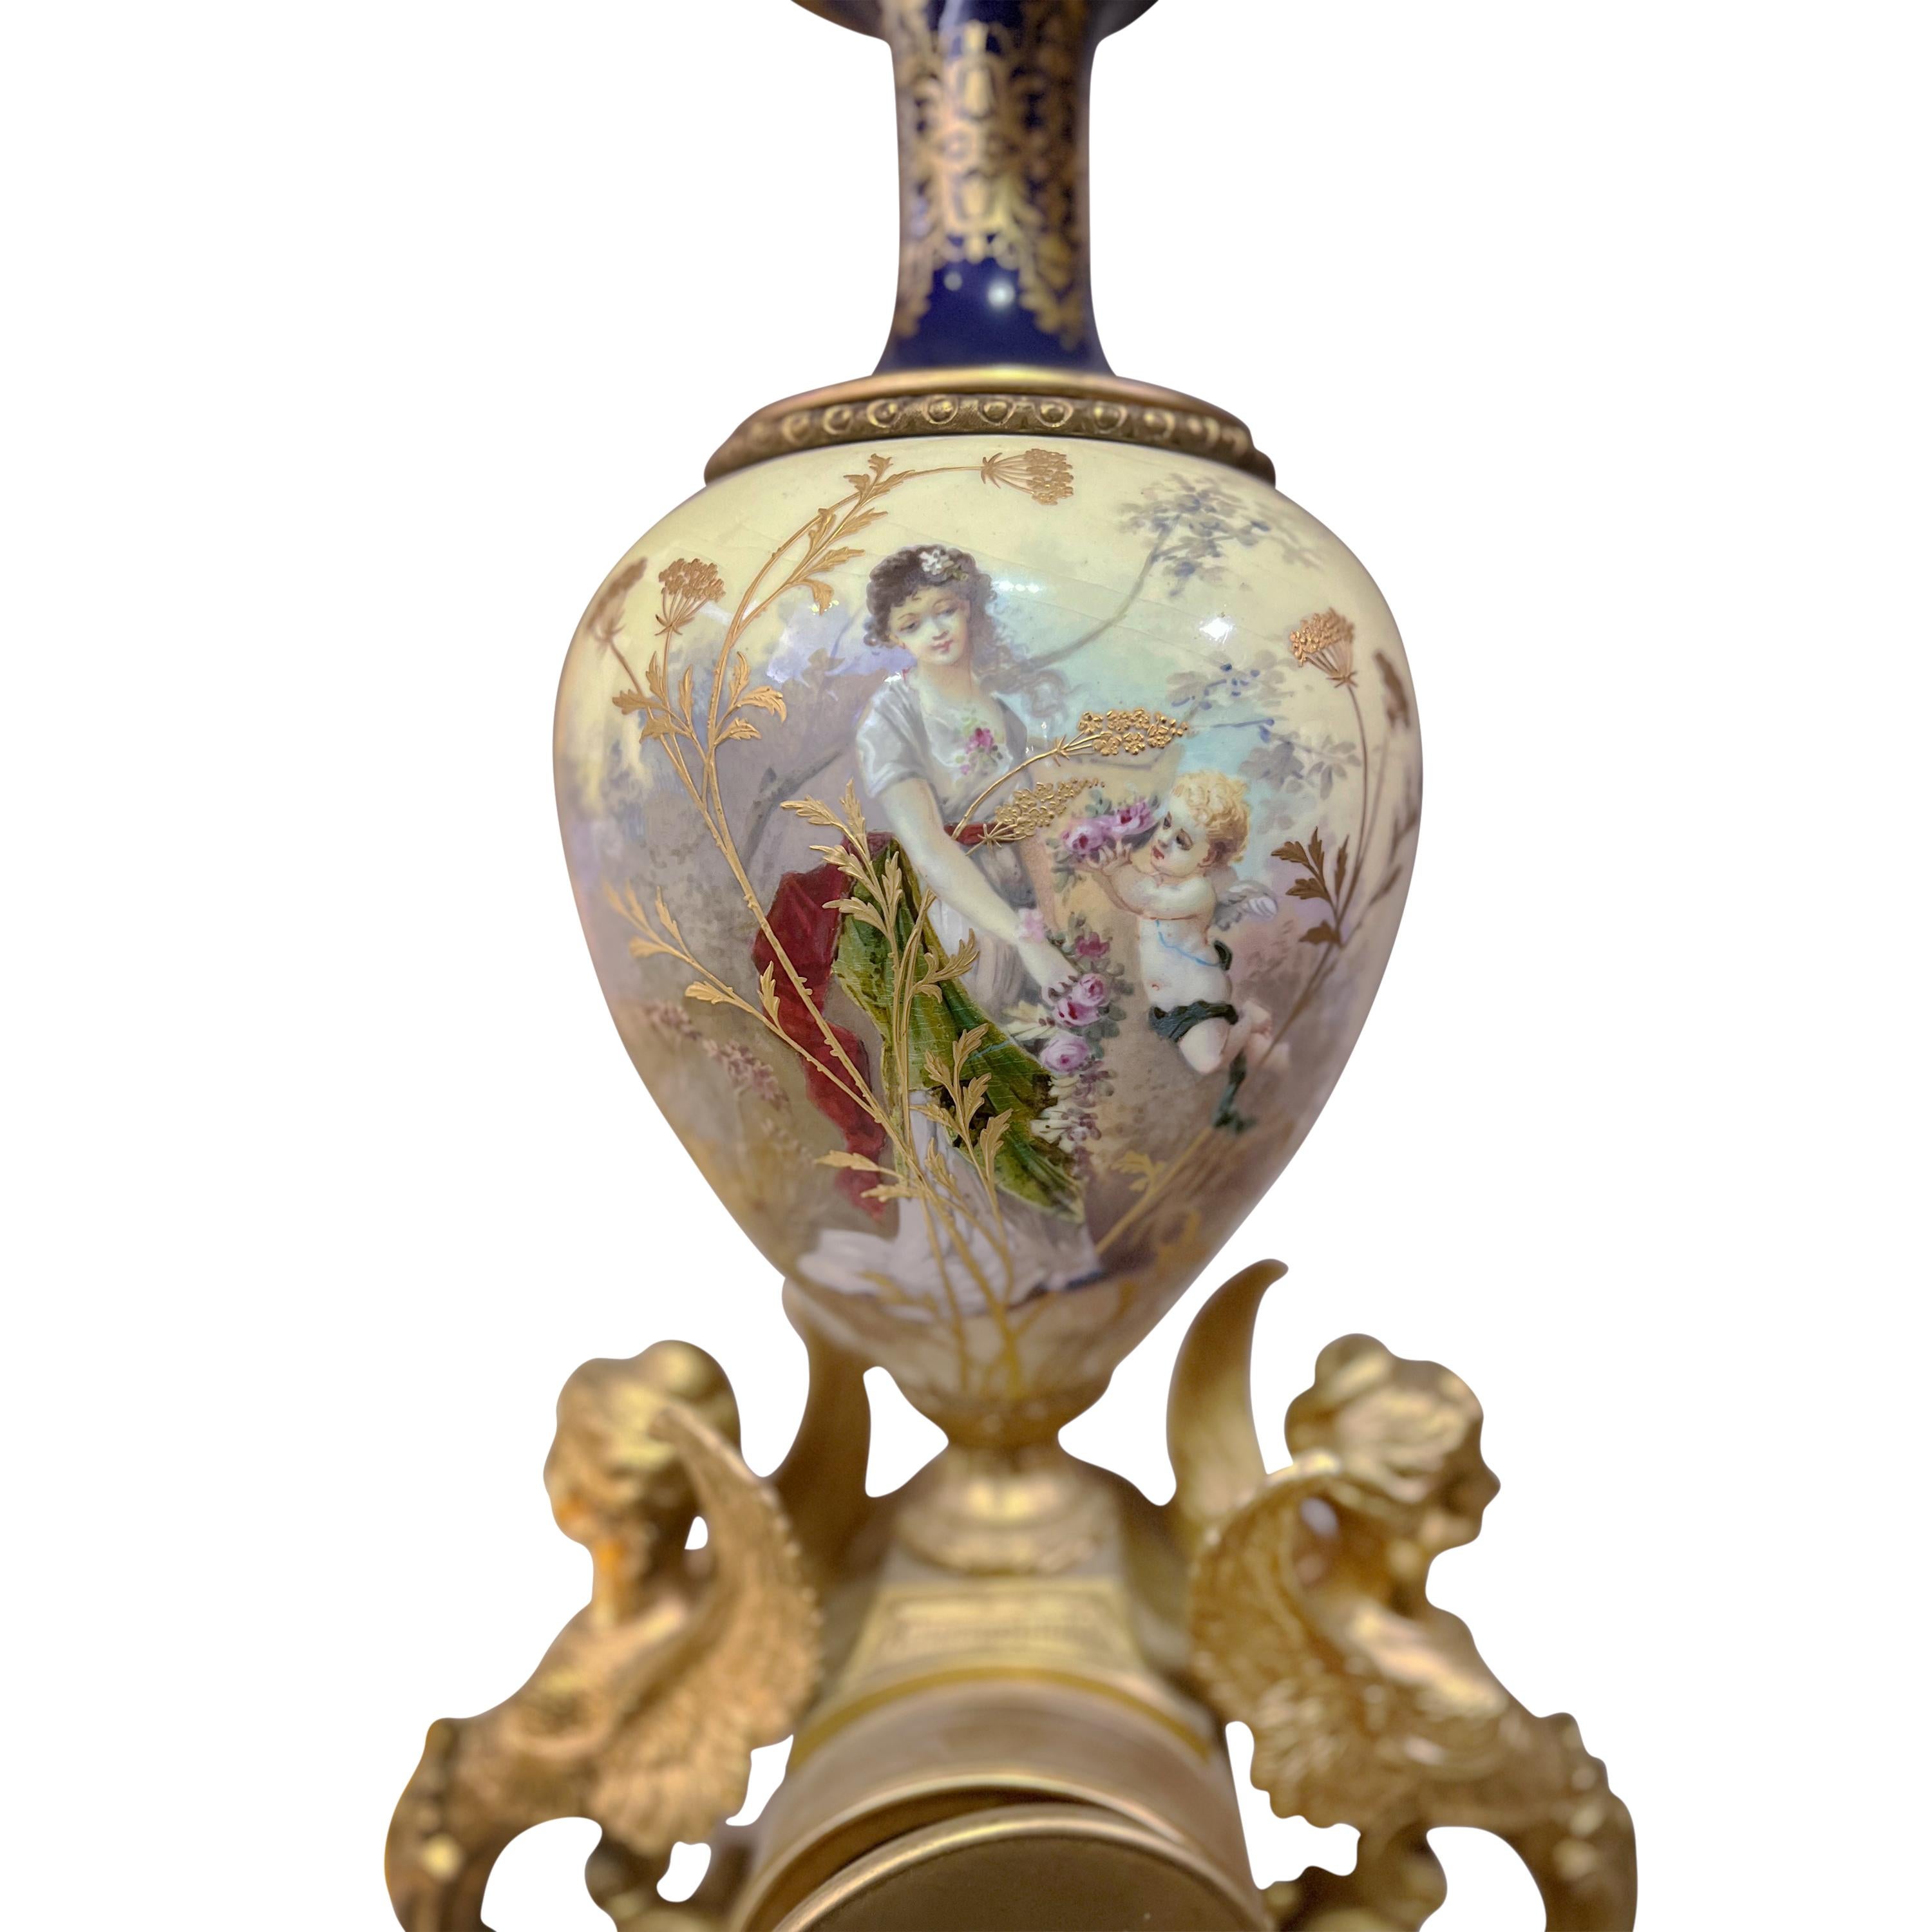 A 19th Century Gilt Bronze & Porcelain Mantel Clock Retailed by Tiffany & Co. For Sale 4